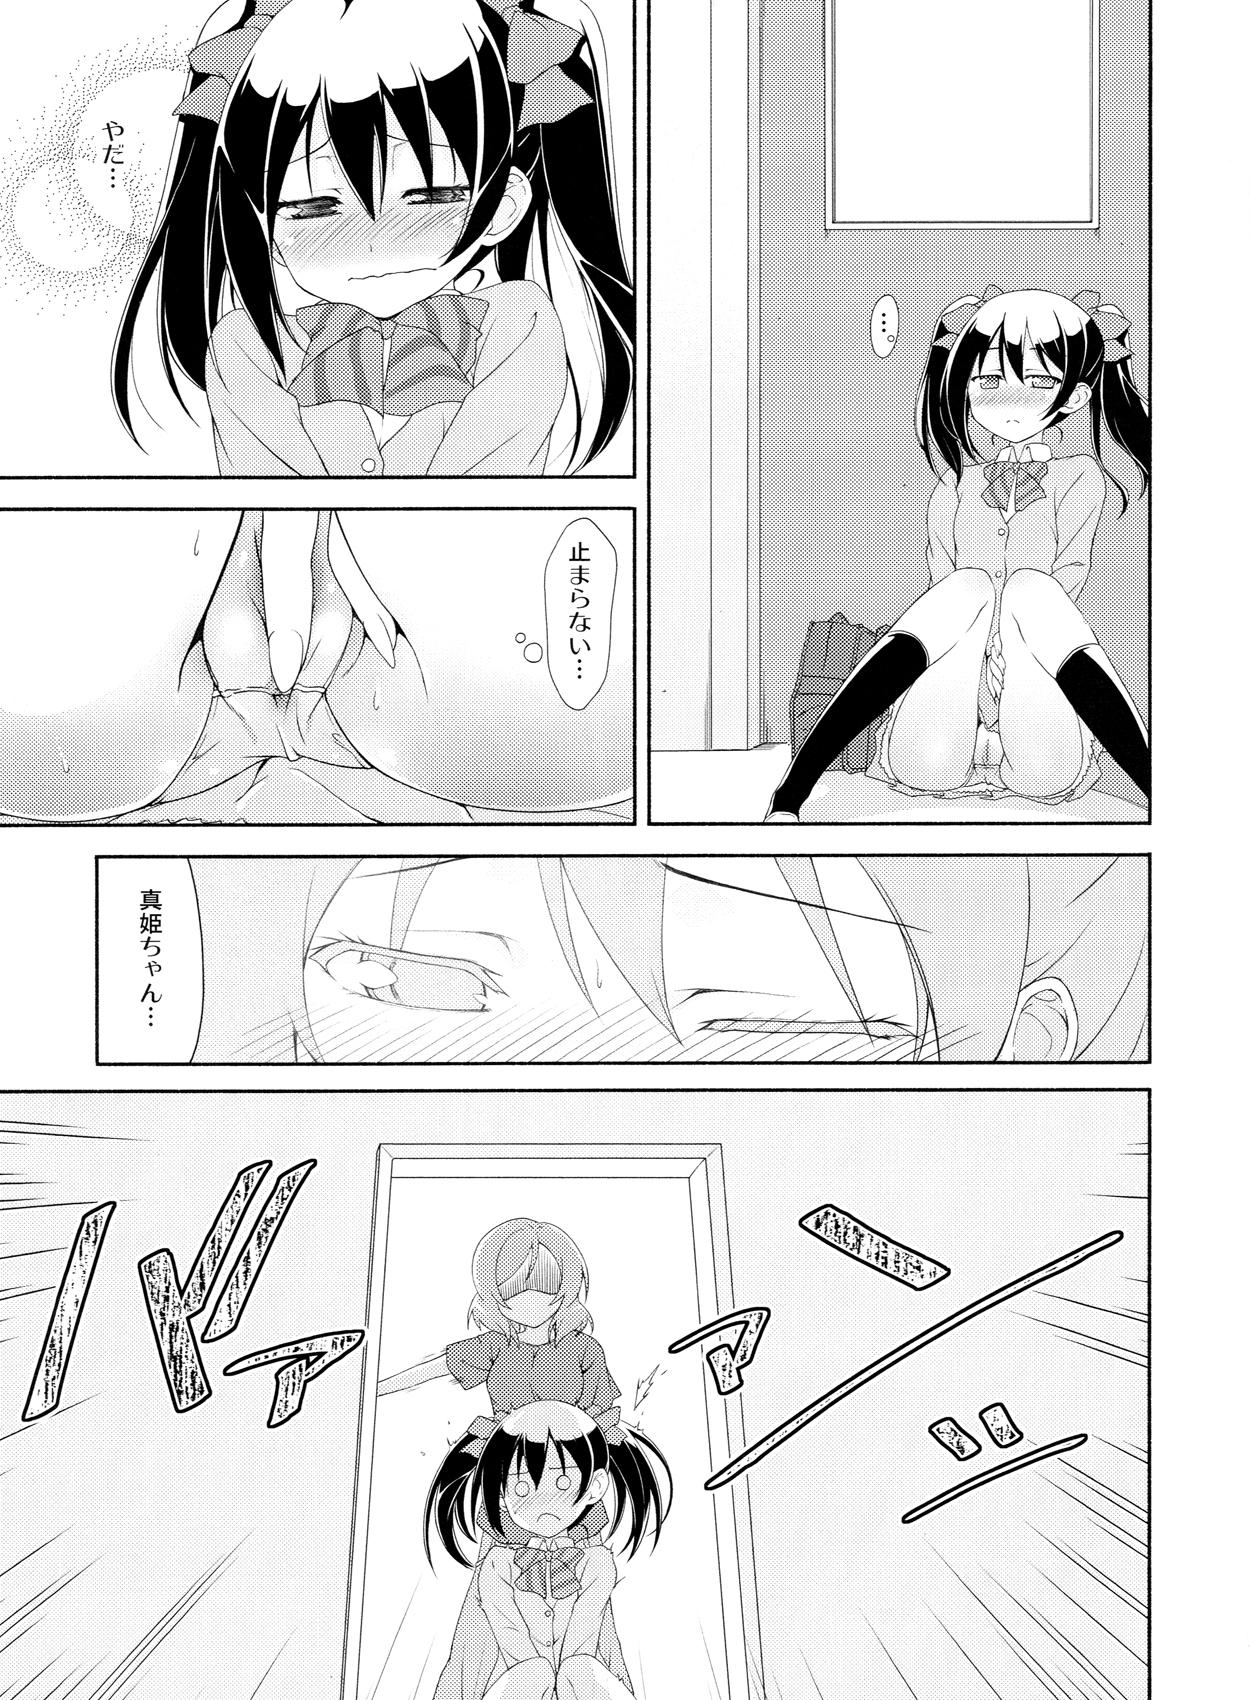 Pussylick Love White - Love live White Chick - Page 6